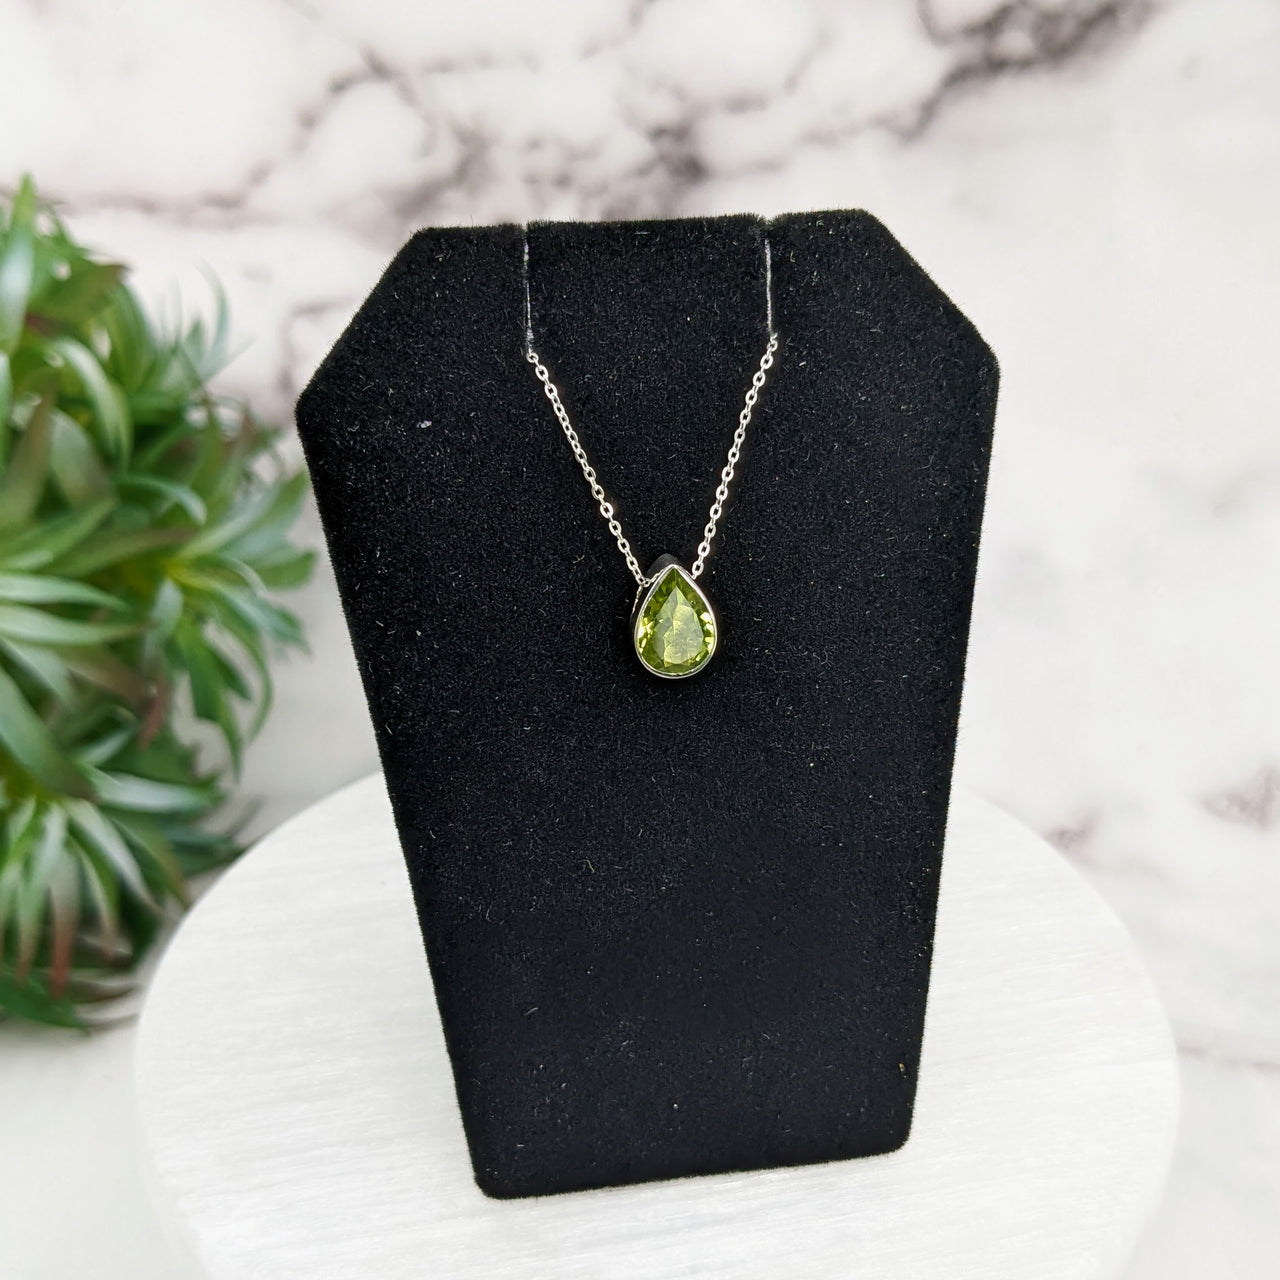 Peridot Faceted Necklace Sterling Silver Slider Pendant on 18" Chain #LV3256